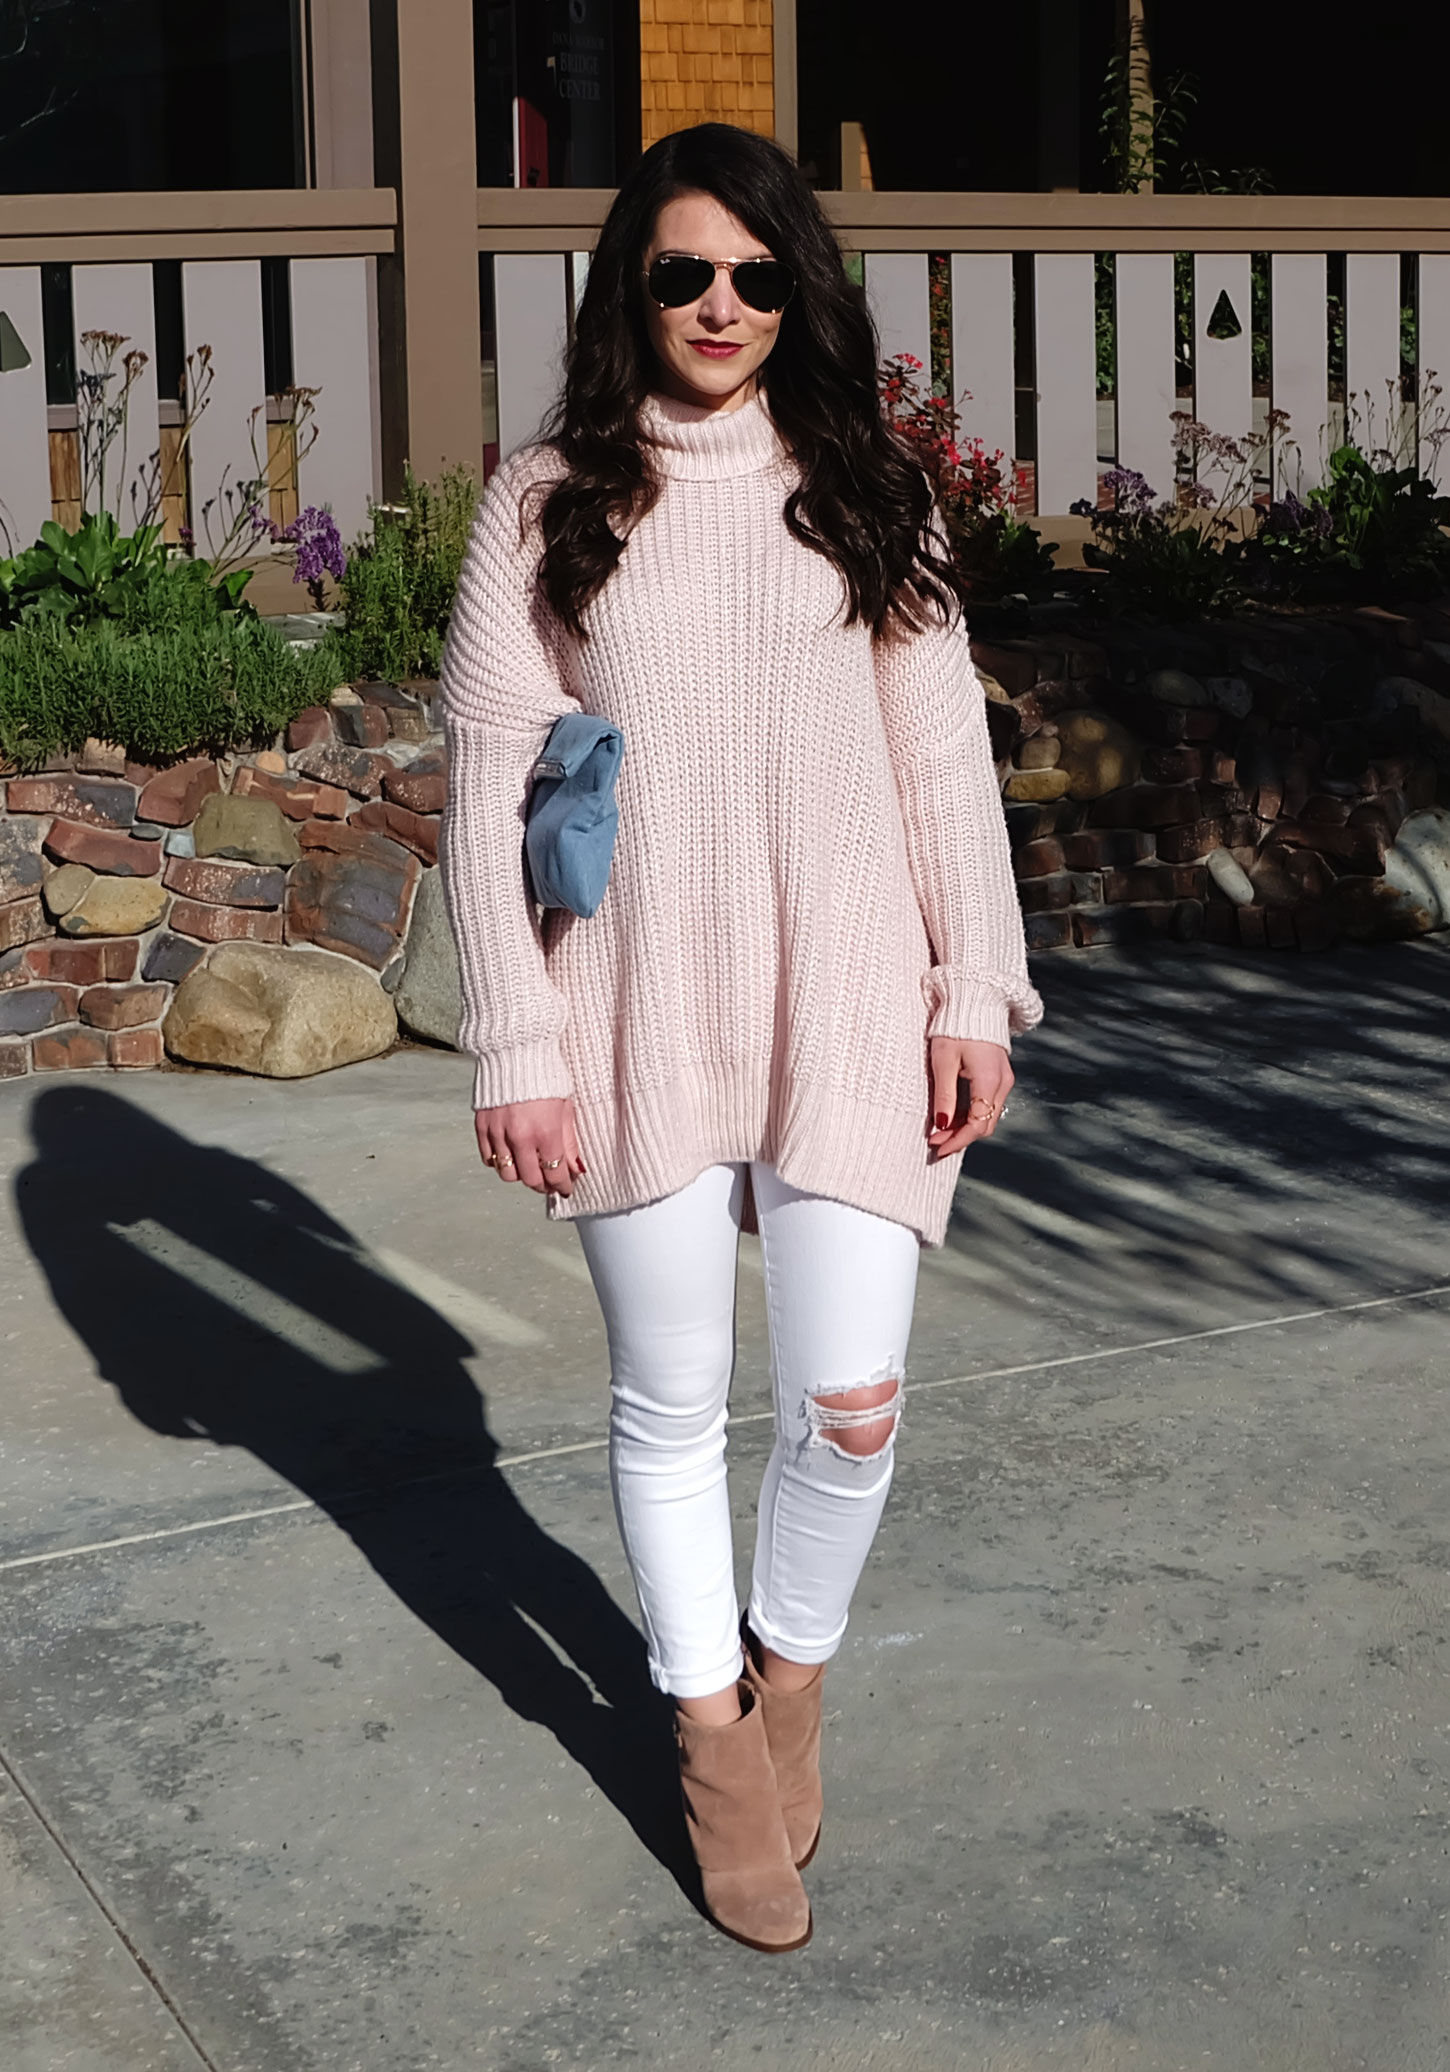 Winter Outfit, Leith Oversized Sweater in Rose Quartz, White Distressed Skinny Jeans, Jessica Simpson Cassley Booties, Pastel Outfit, Pantone Colors of The Year 2016